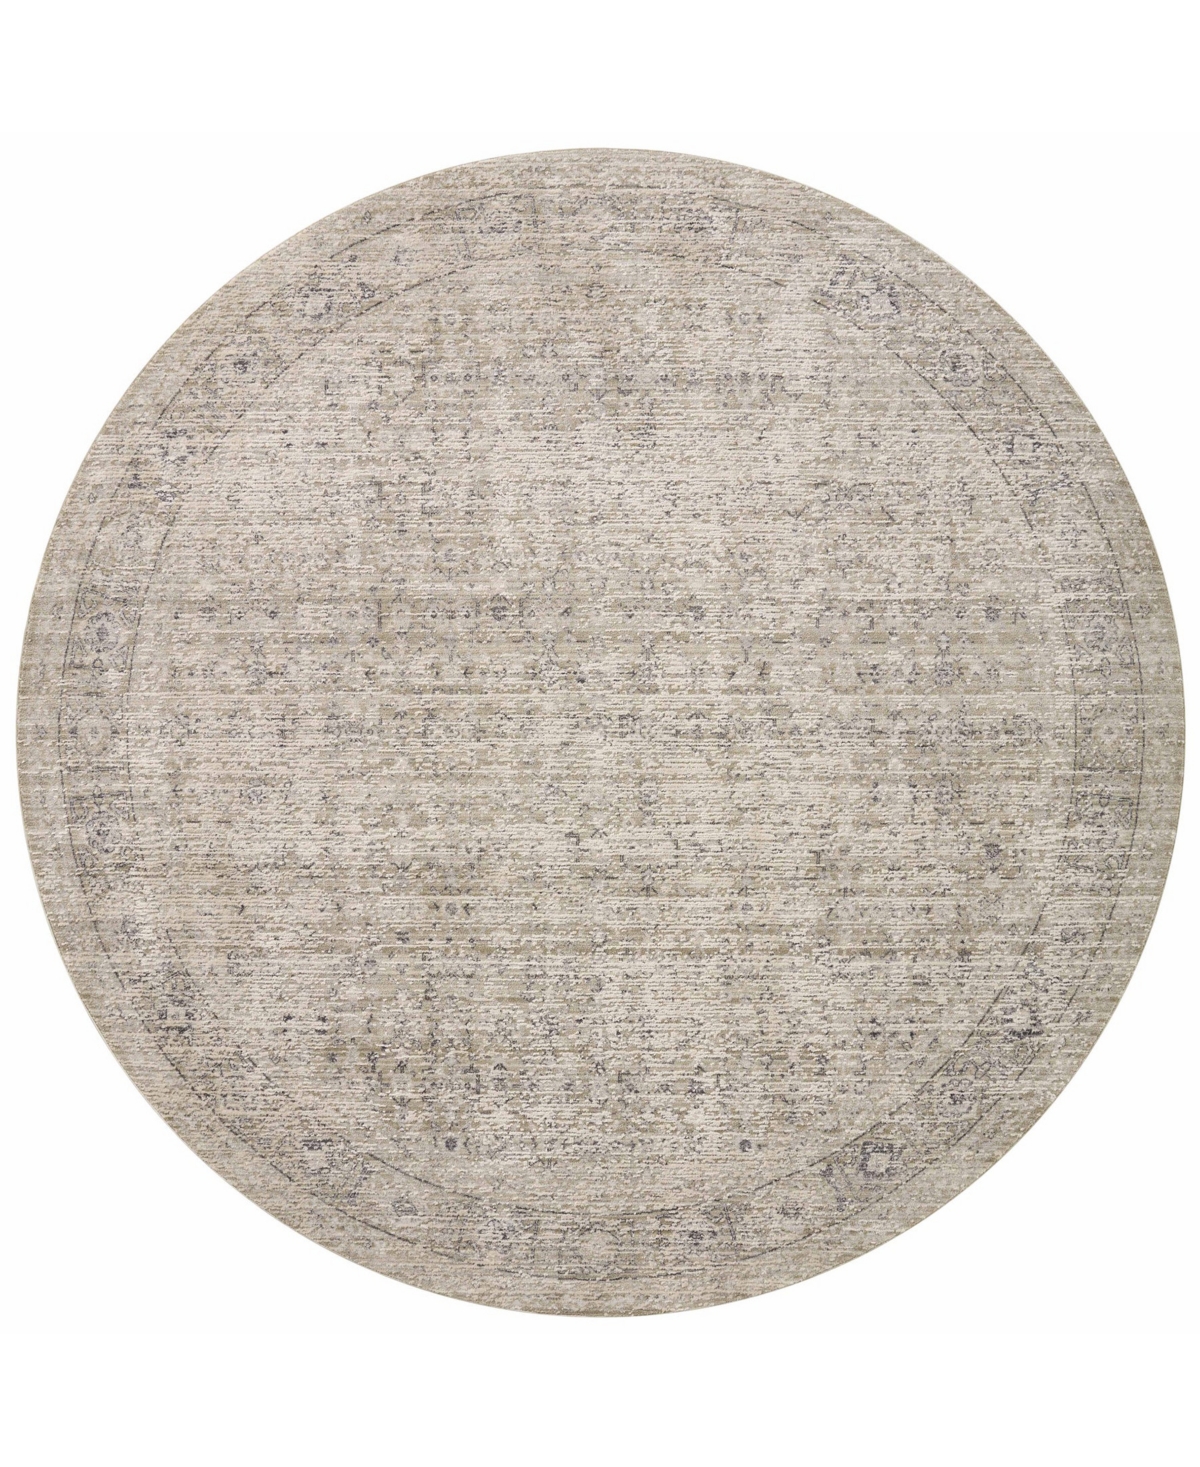 Amber Lewis X Loloi Alie Ale-03 5'3" X 5'3" Round Area Rug In Taupe,gray